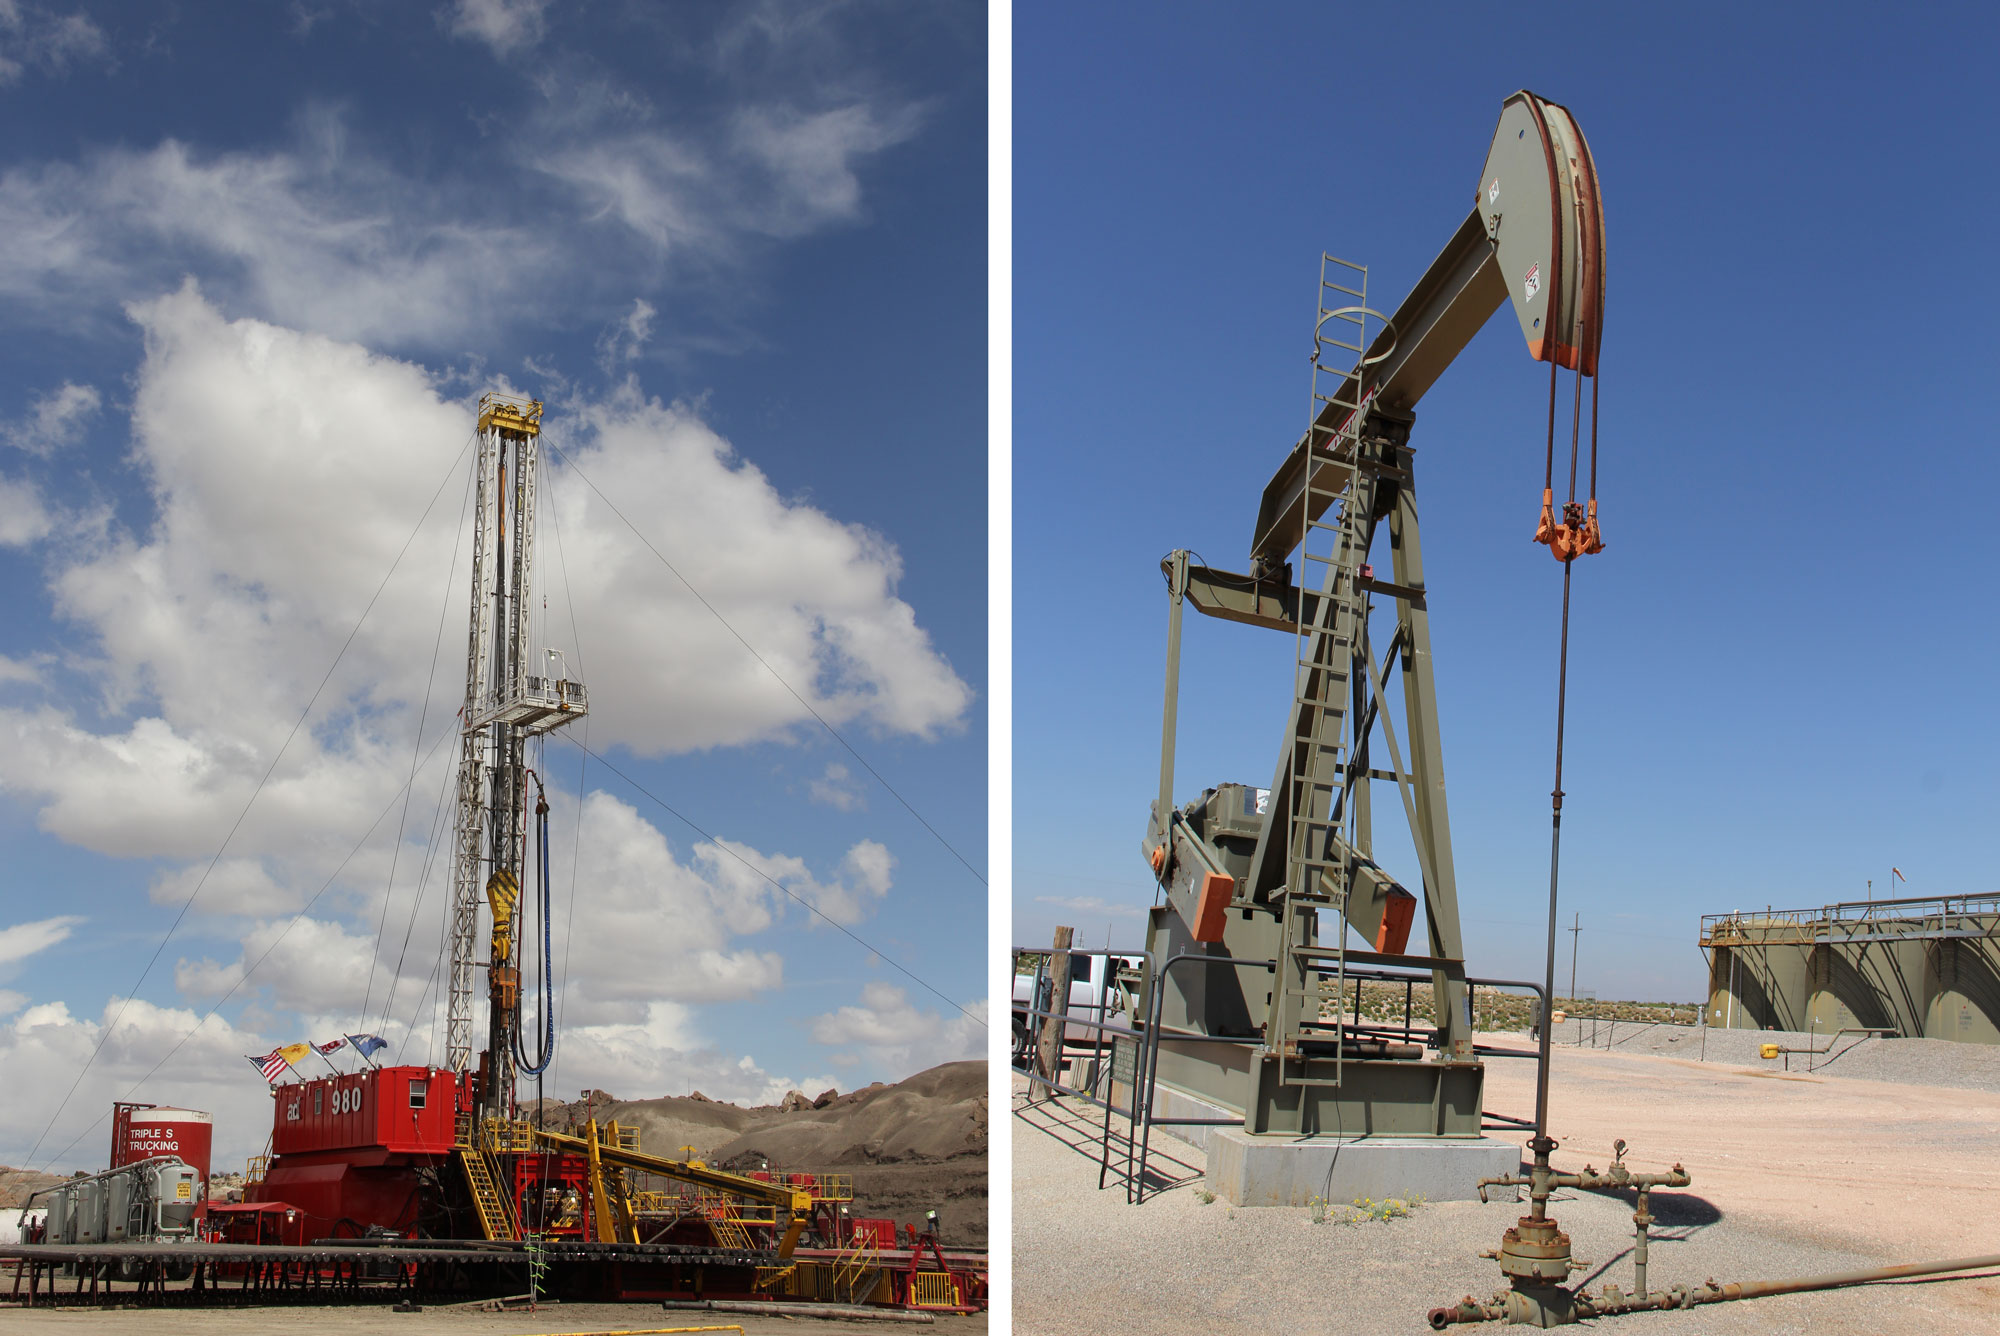 2-panel images showing photos of equipment used for oil and gas extraction near Farmington, New Mexico. Panel 1: A drill rig. A tall metal tower sits on a horizontal platform in a dry landscape with low brown hills in the background. Panel 2: A dull green pumpjack on flat ground in the left foreground with storage tanks in the background to the right.